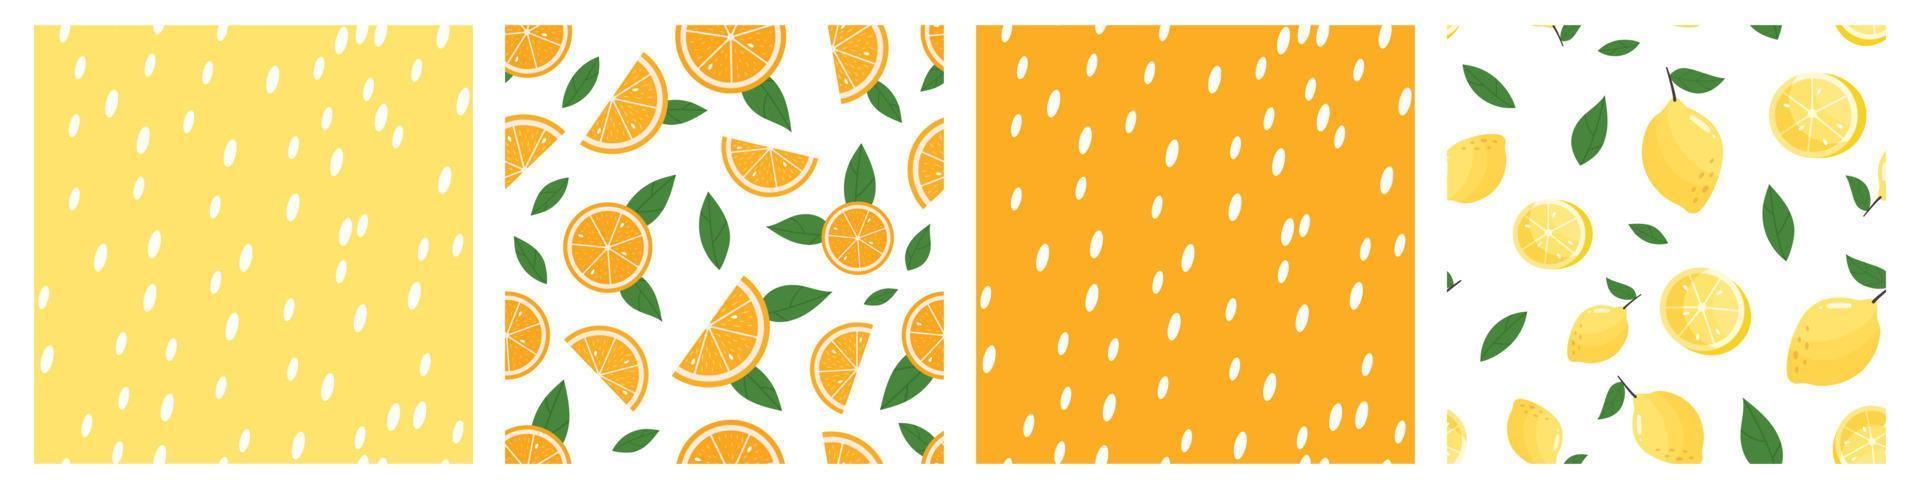 Set of seamless patterns with oranges, lemons vector